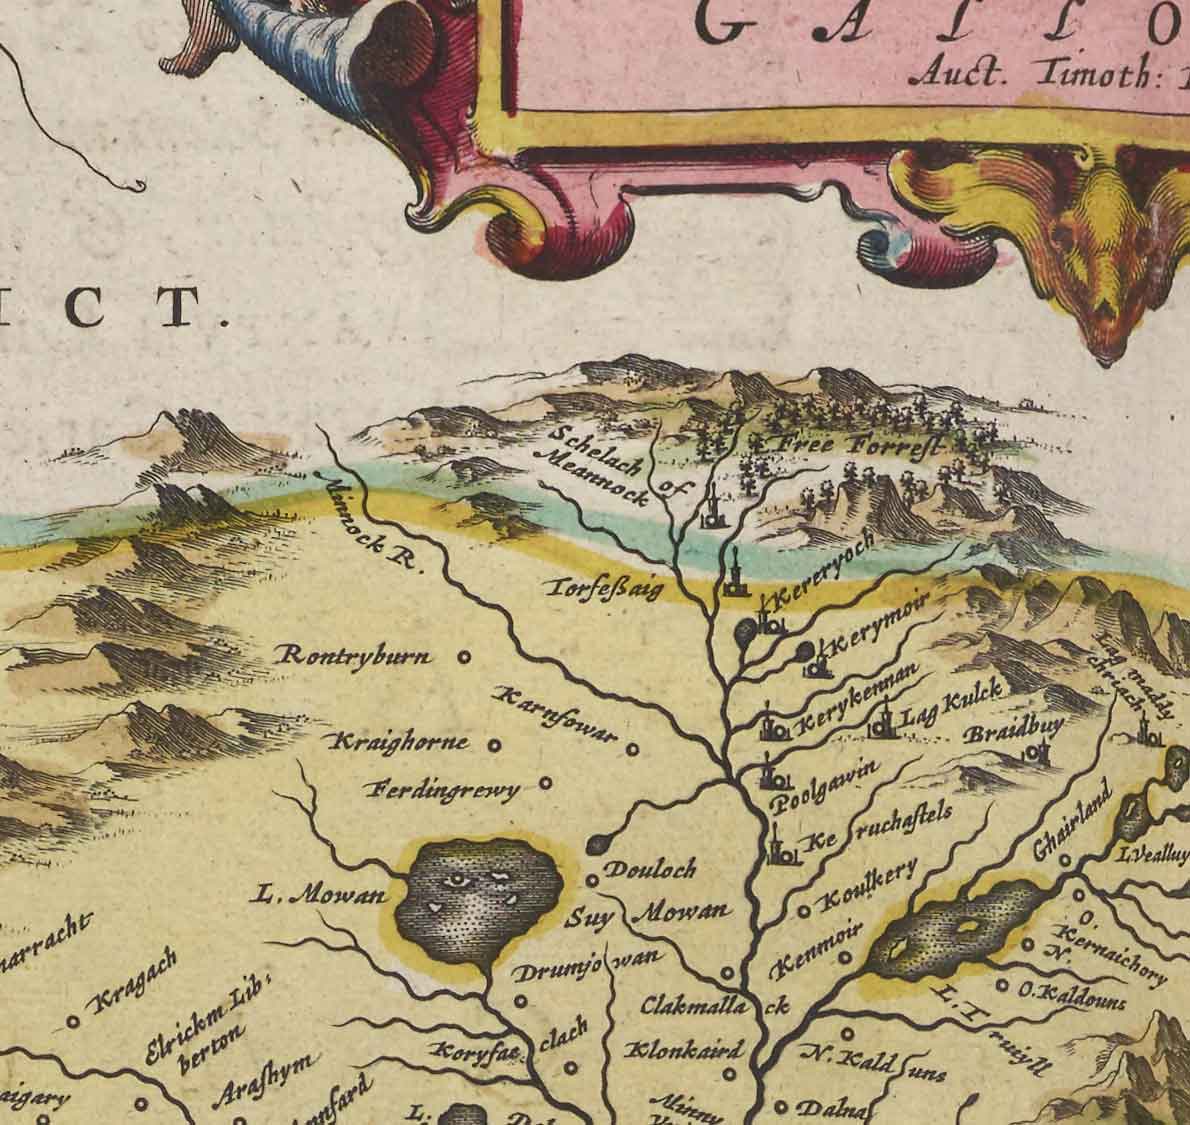 Old Map of Galloway in 1665 by Joan Blaeu - Dumfries, Glenluce, Wigtown, Whithorn, Drummore